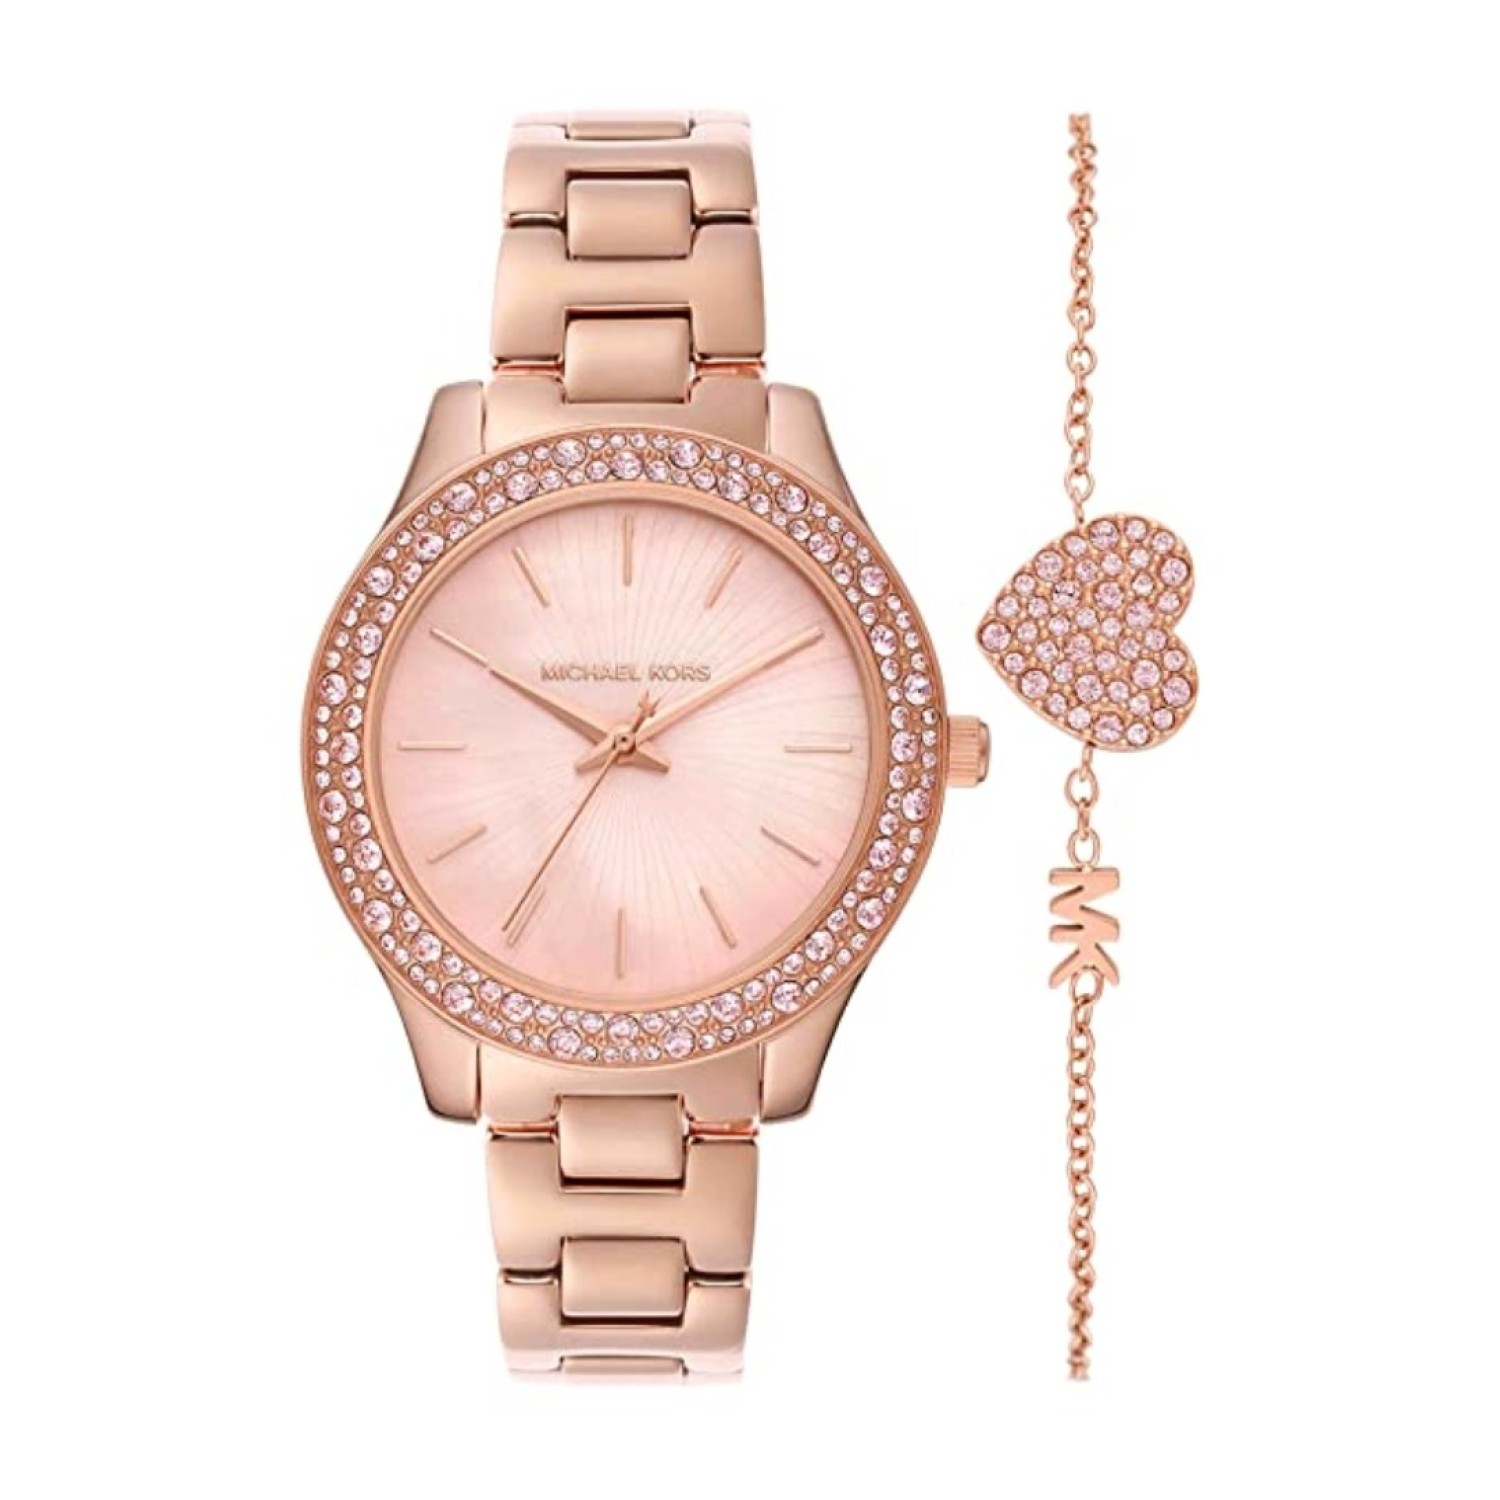 MK1068 SET Michael Kors Liliane Rose Gold Watch set. The watch model MK1068 Set is a Michael Kors ladies' watch and bracelet set that features a stylish and elegant design.